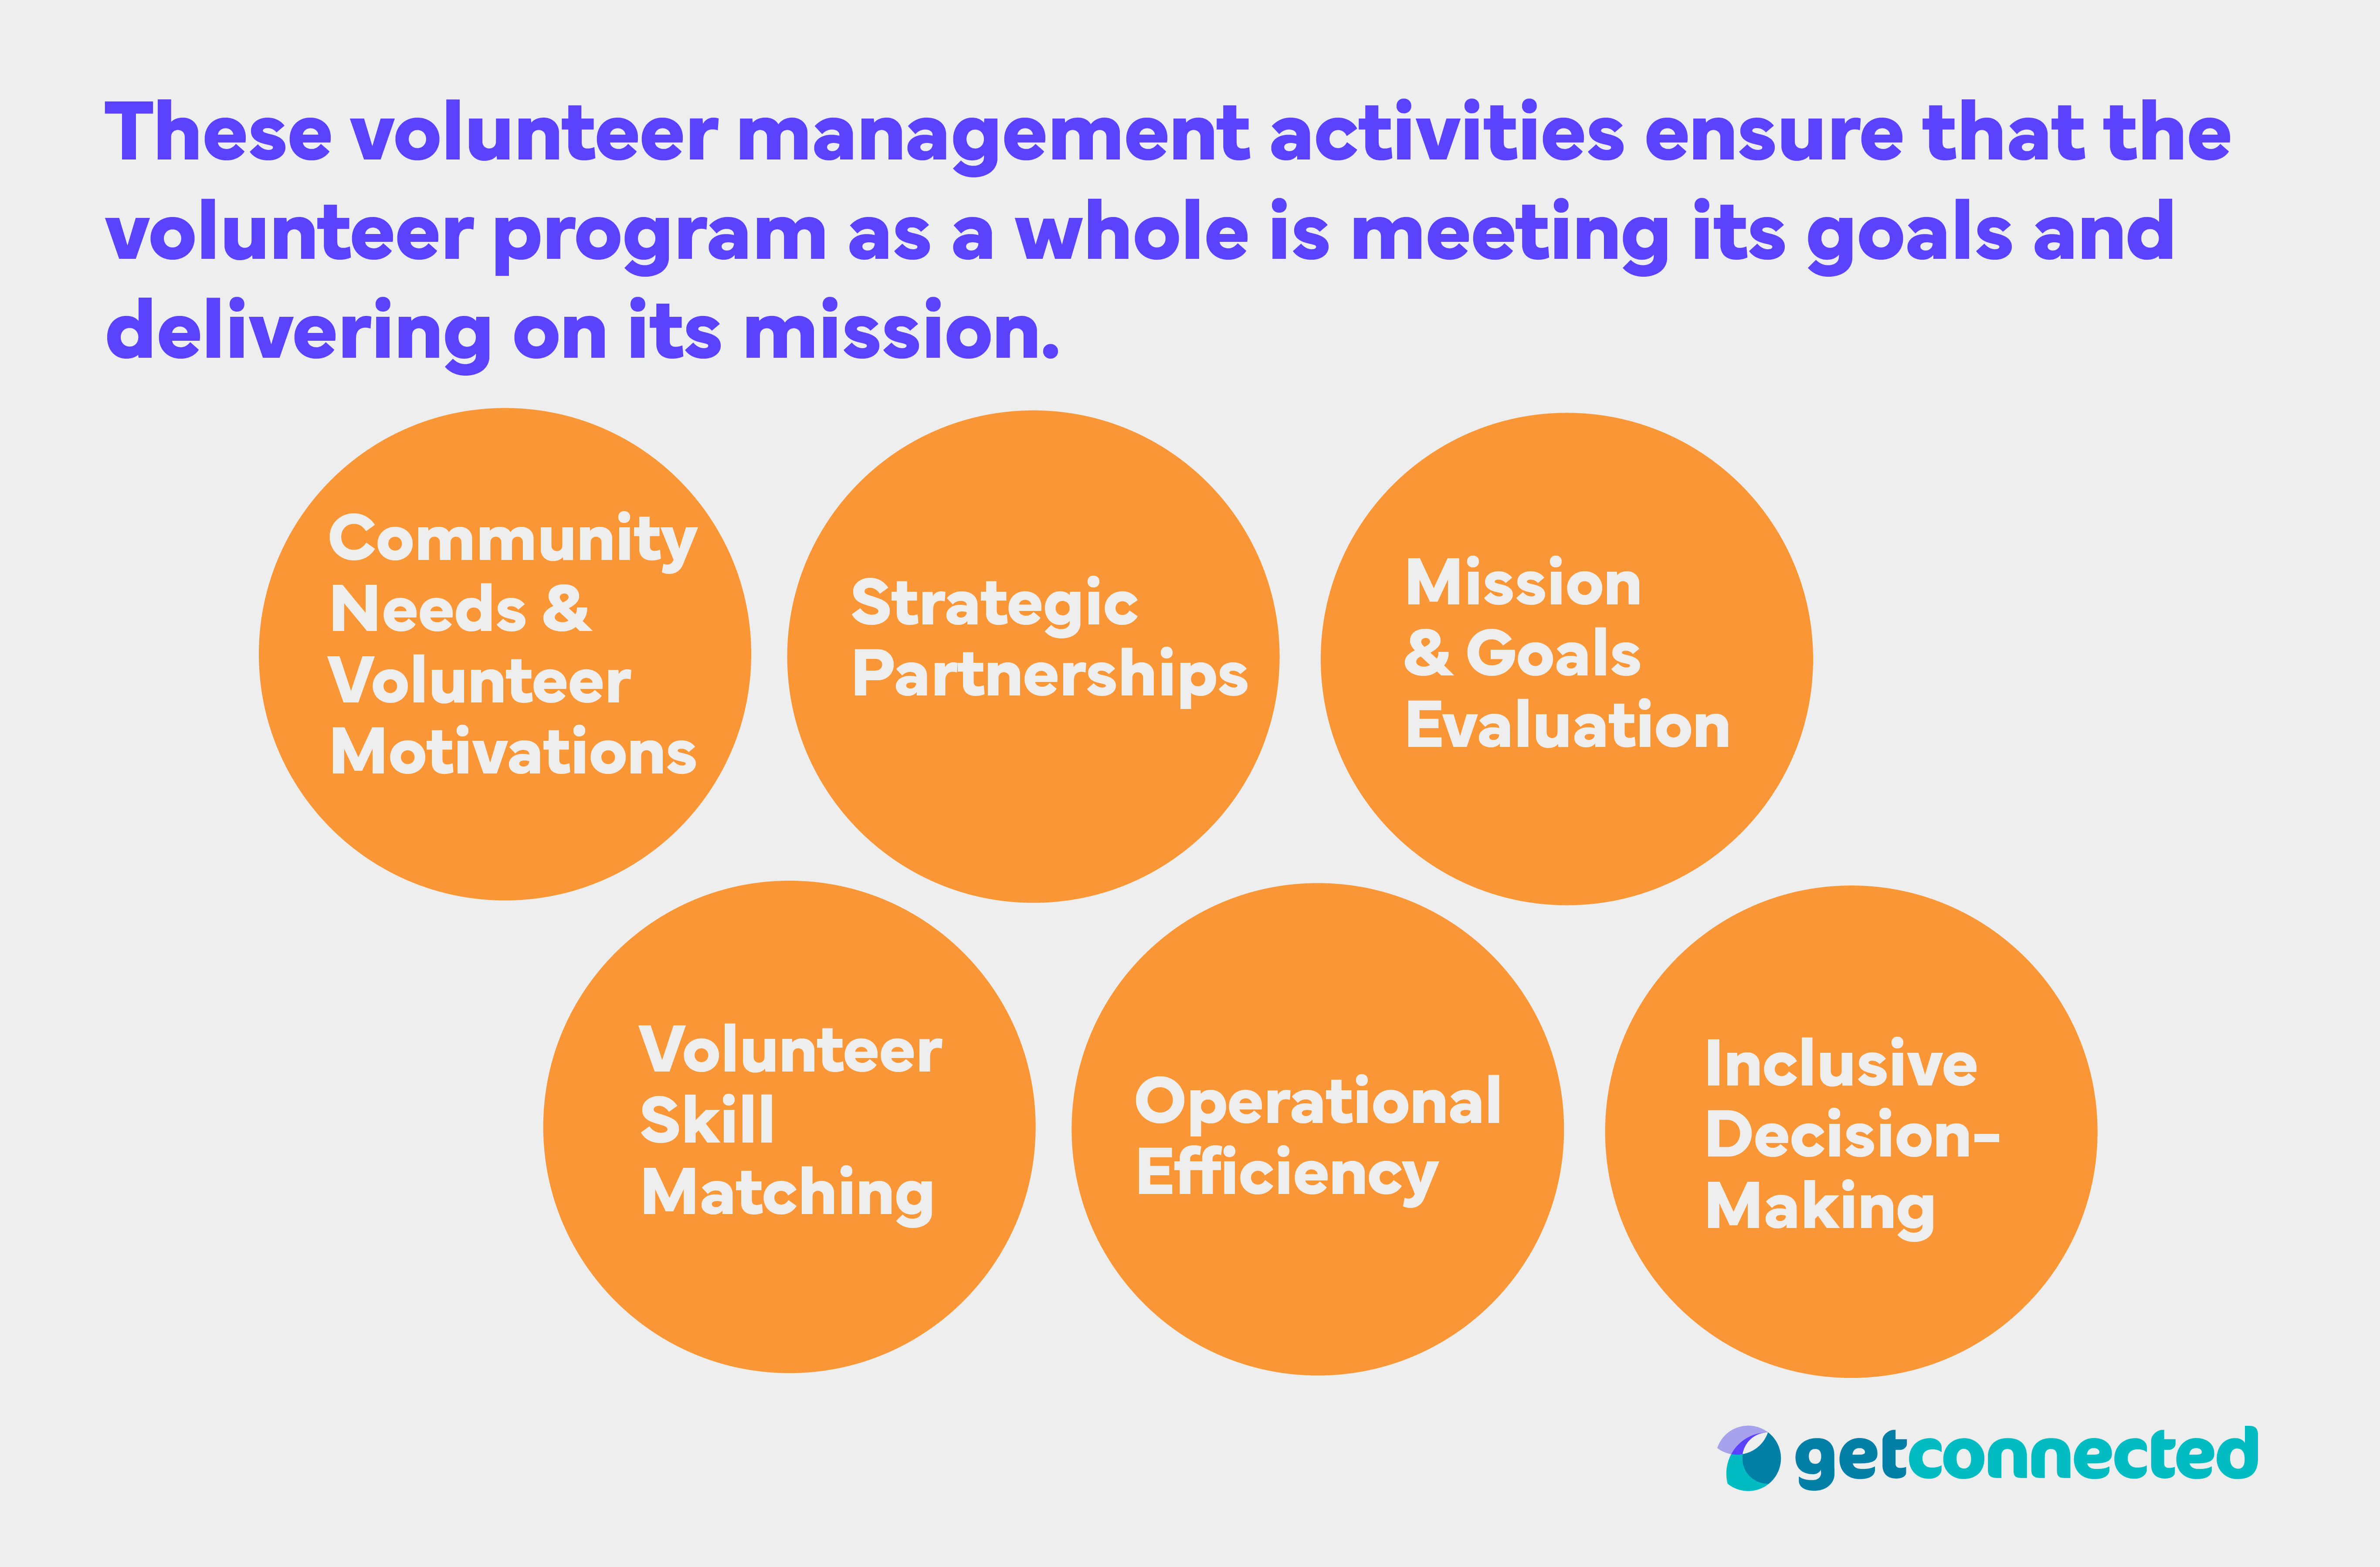 How to start a volunteer program and activities to meet mission goals